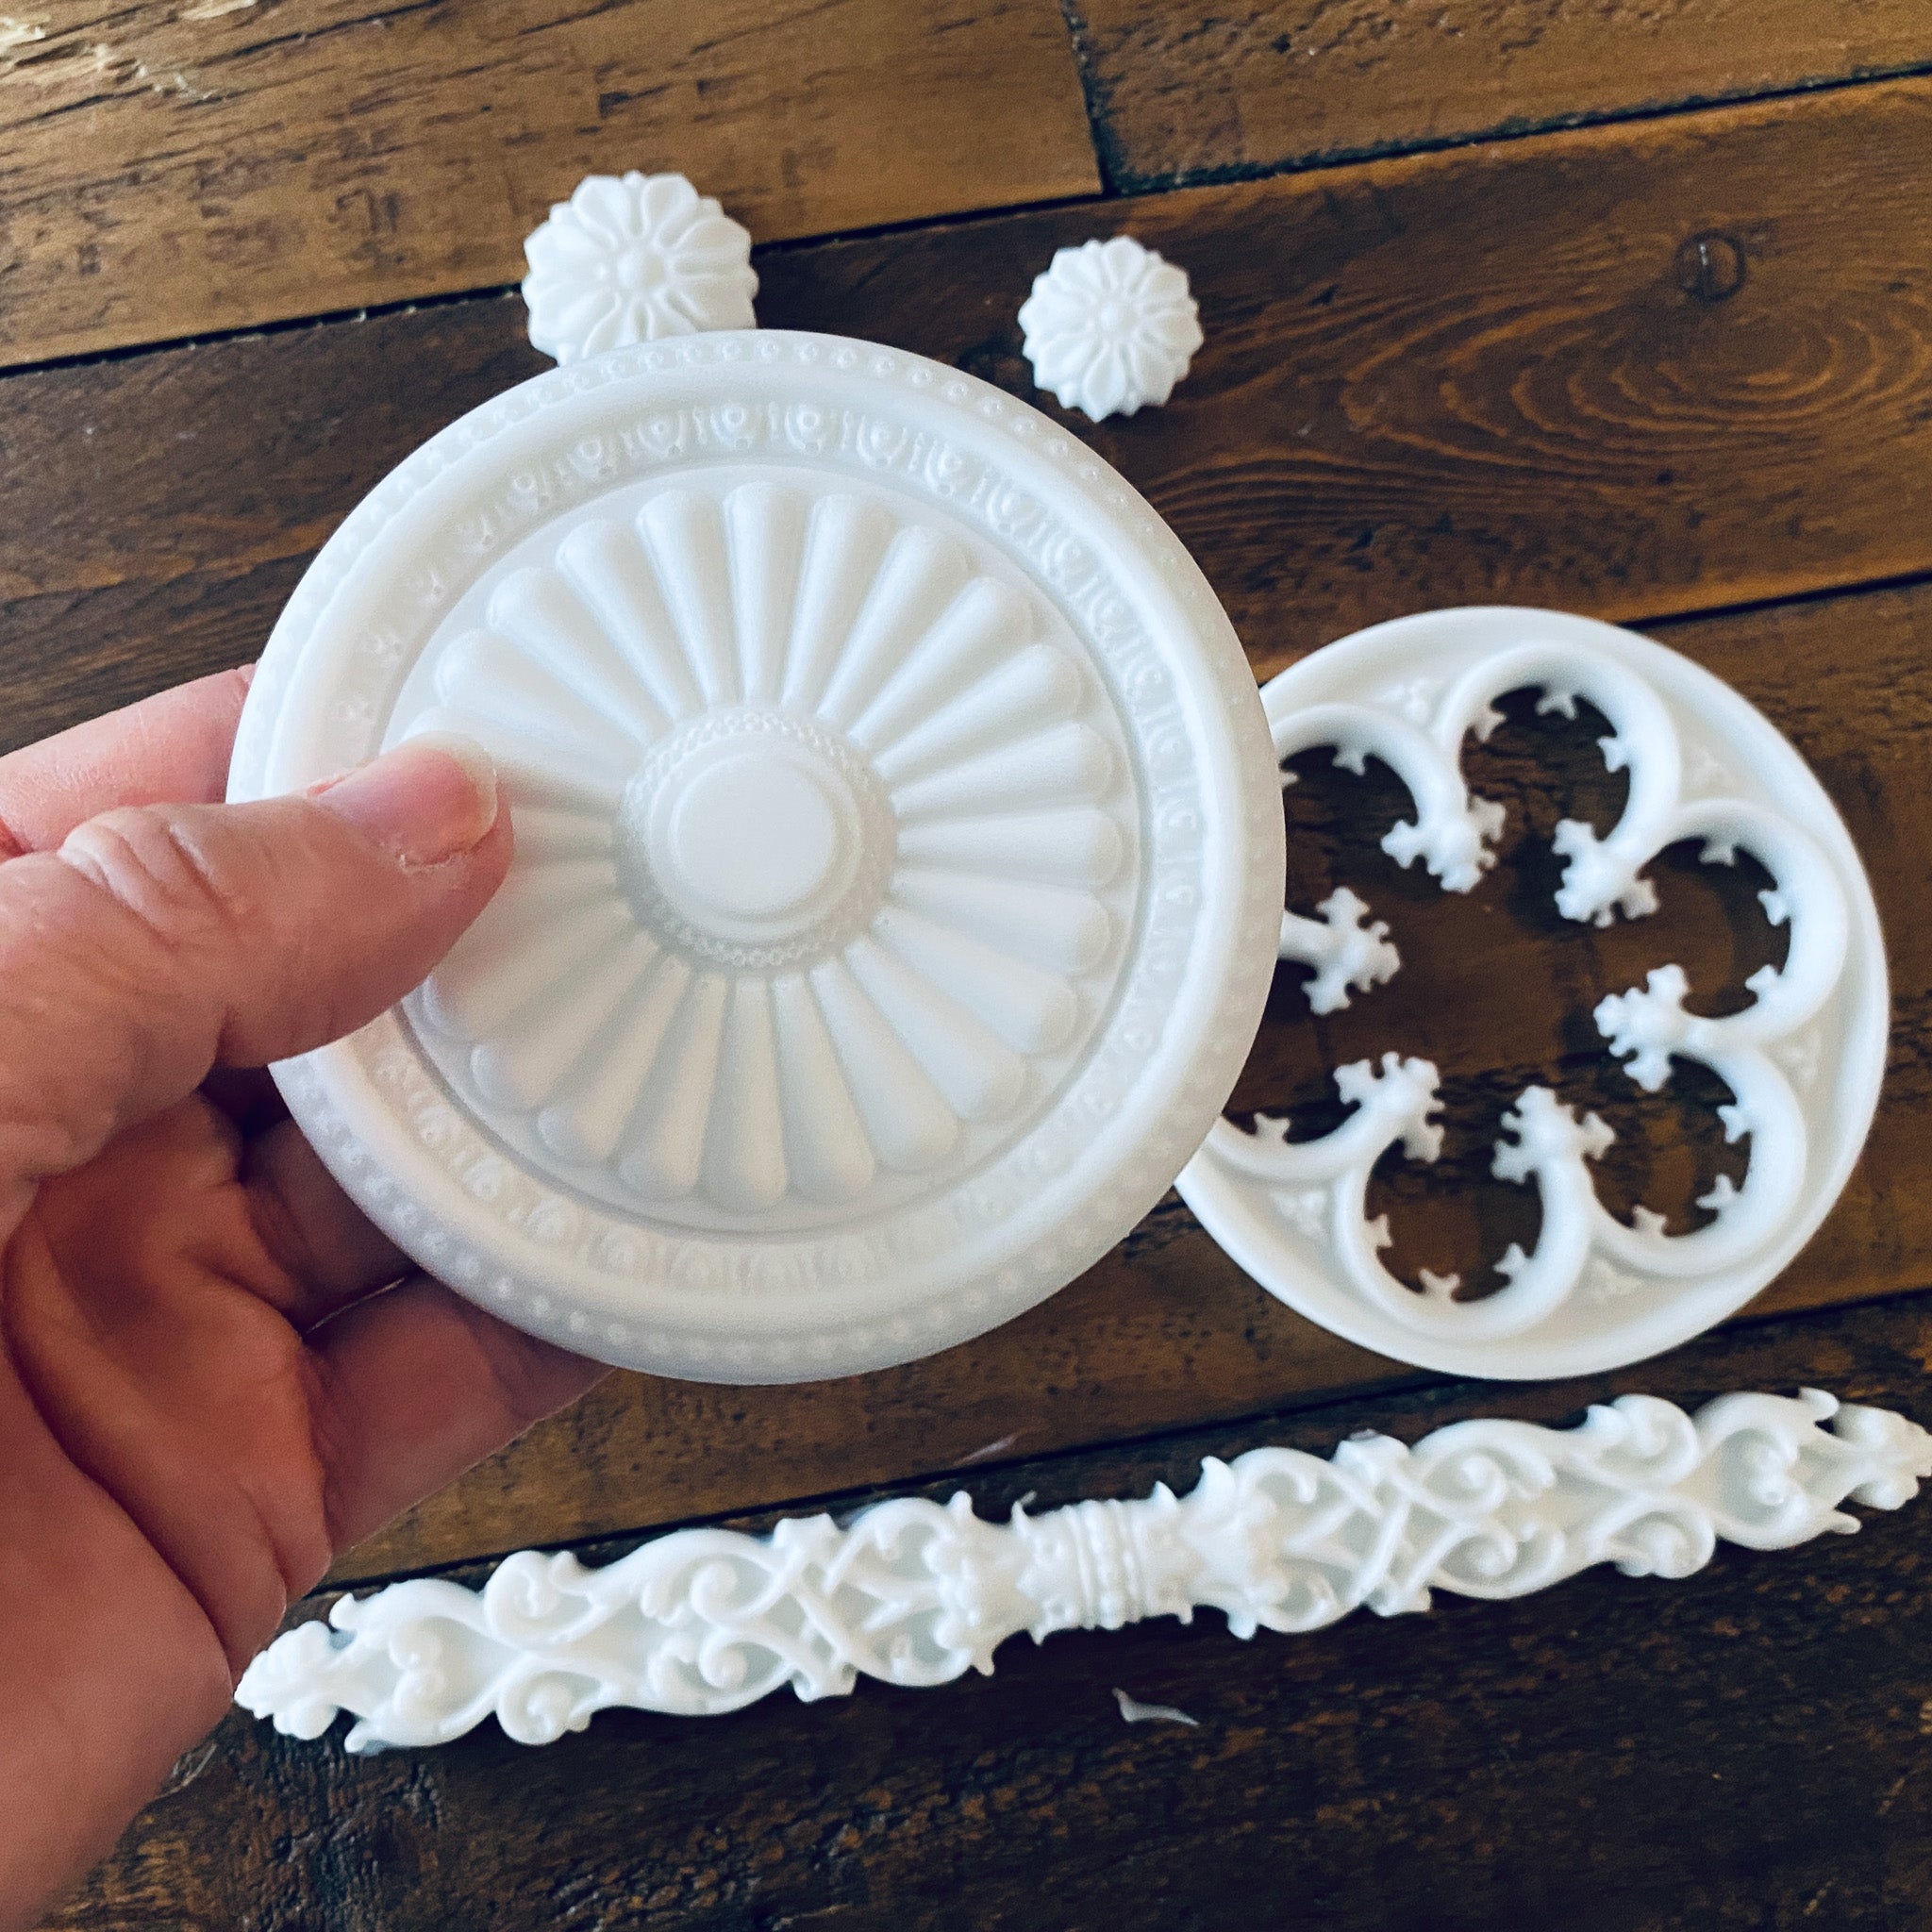 White resin castings of 2 round ornate accent pieces, 2 small round flowers, and a long ornate rod accent piece are against a wood background. A hand is holding one of the larger castings.